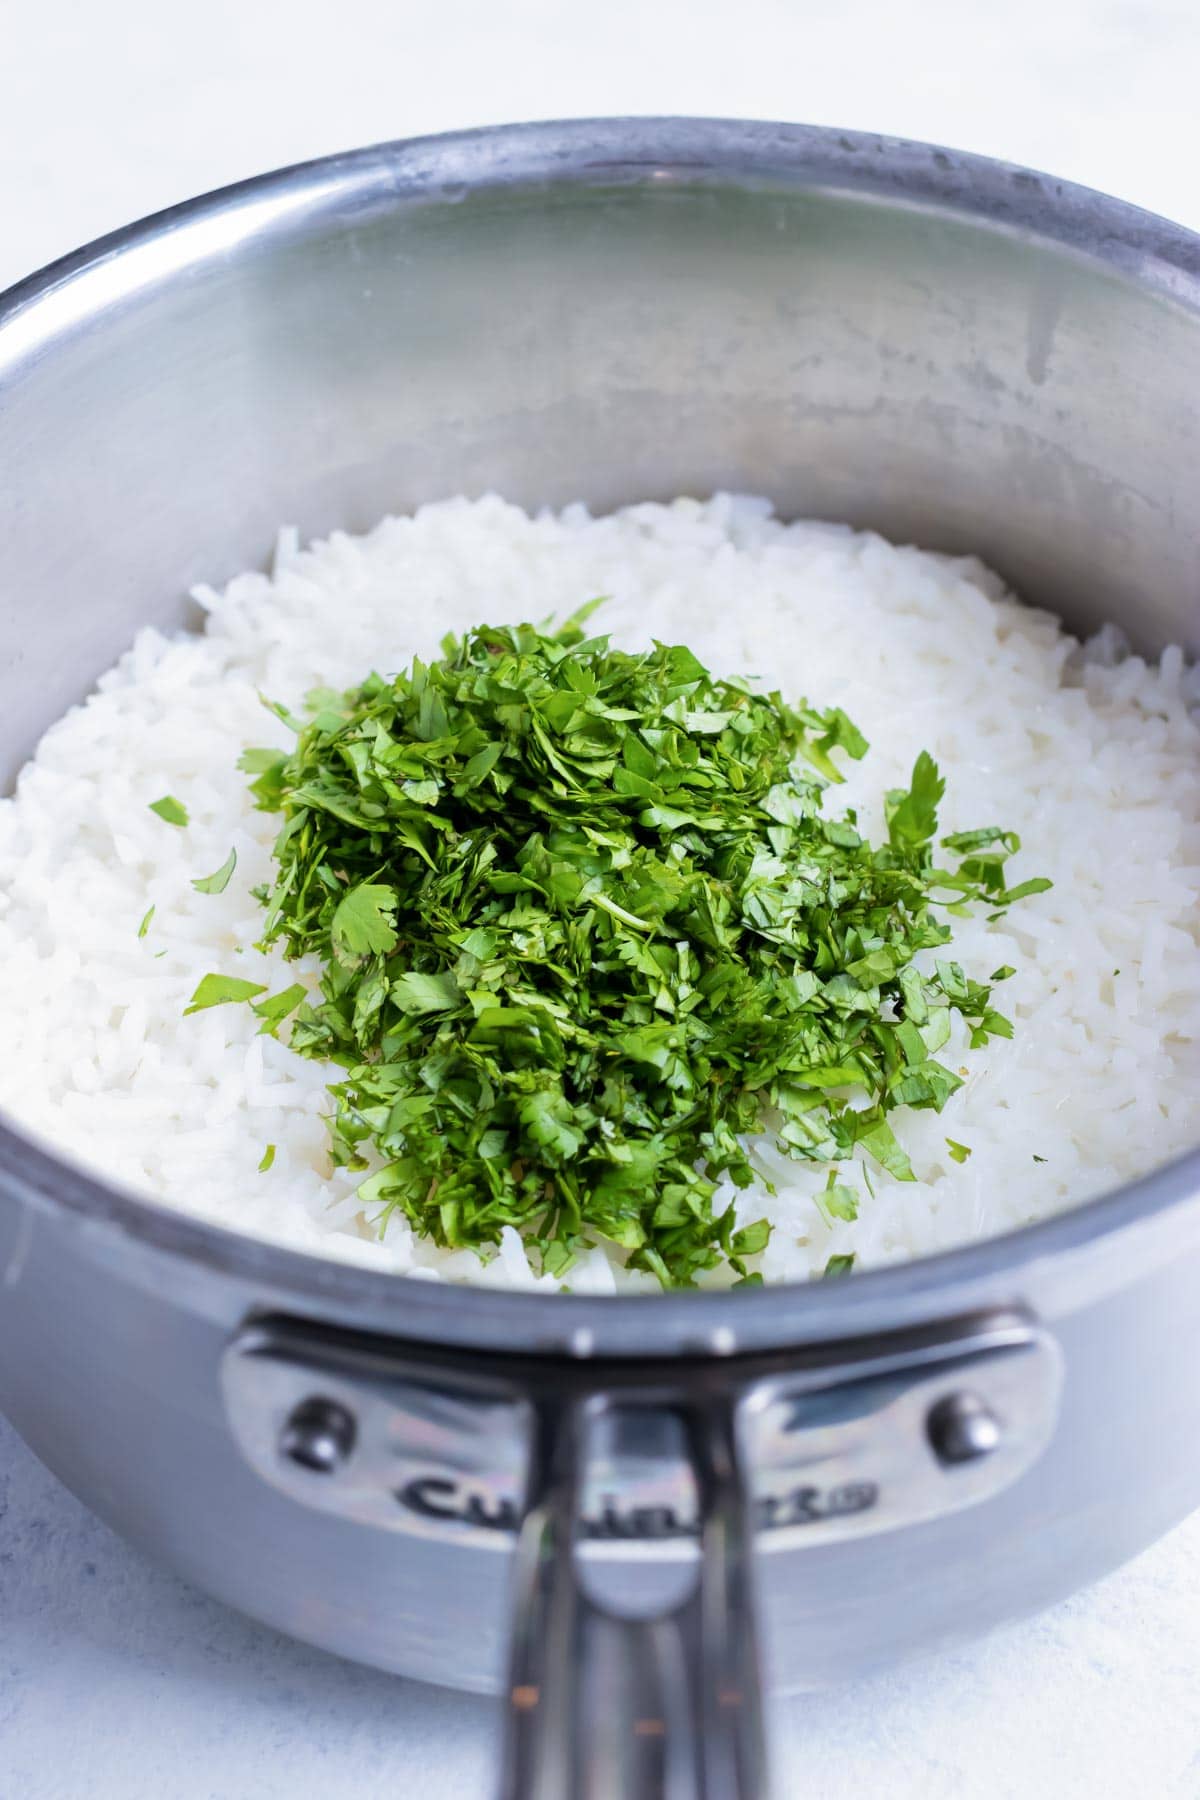 Chopped cilantro leaves are added to the cooked white rice.